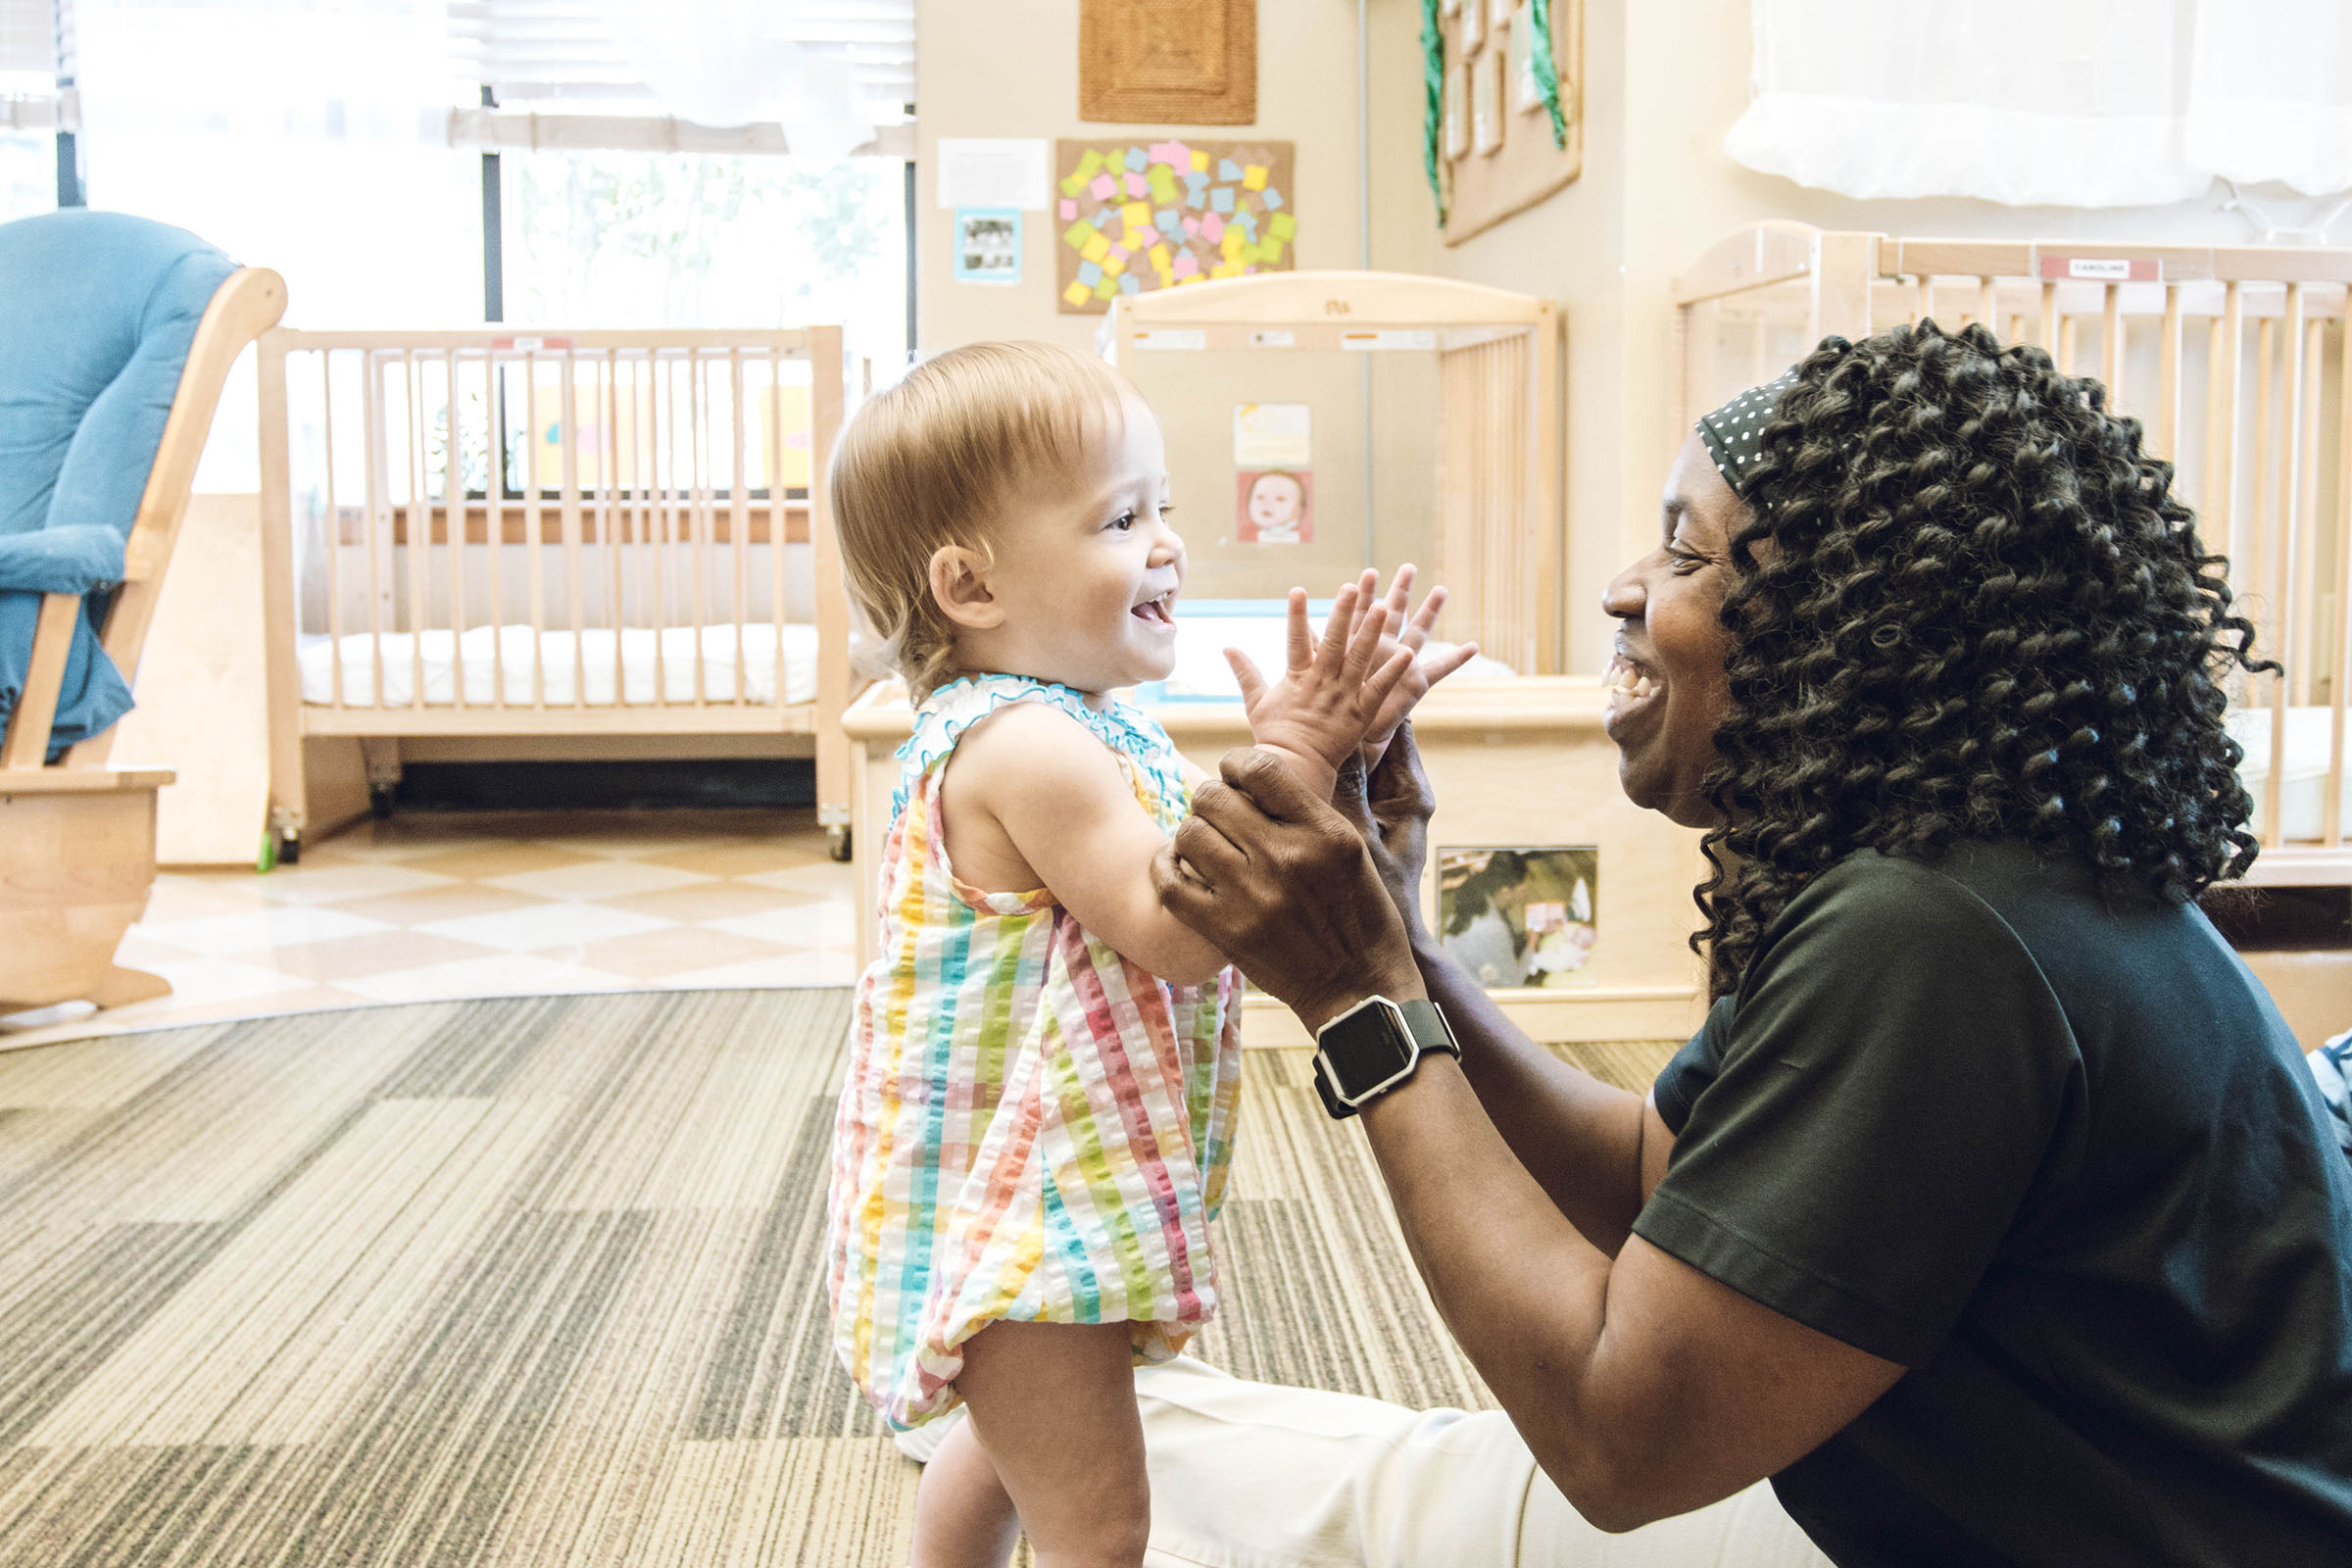 female toddler smiling with Black female teacher holding her as she stands and smiling